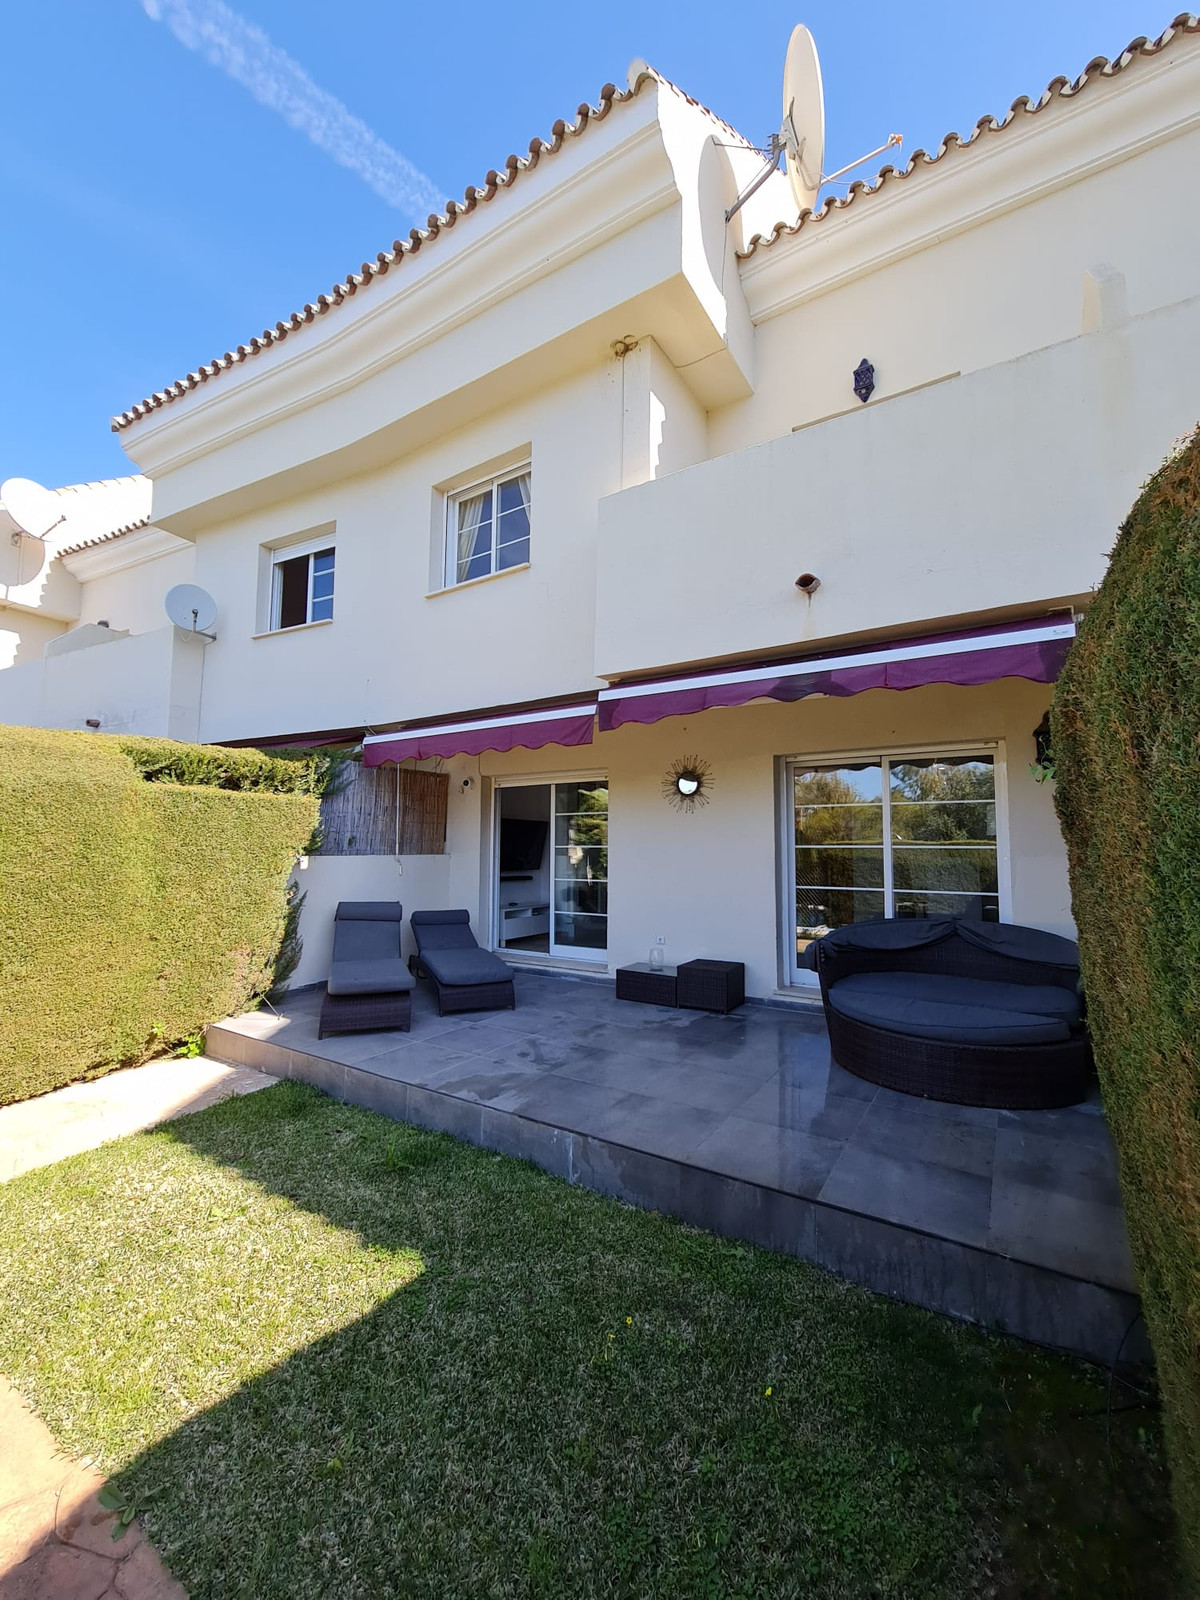 						Townhouse  Terraced
																					for rent
																			 in Marbella
					